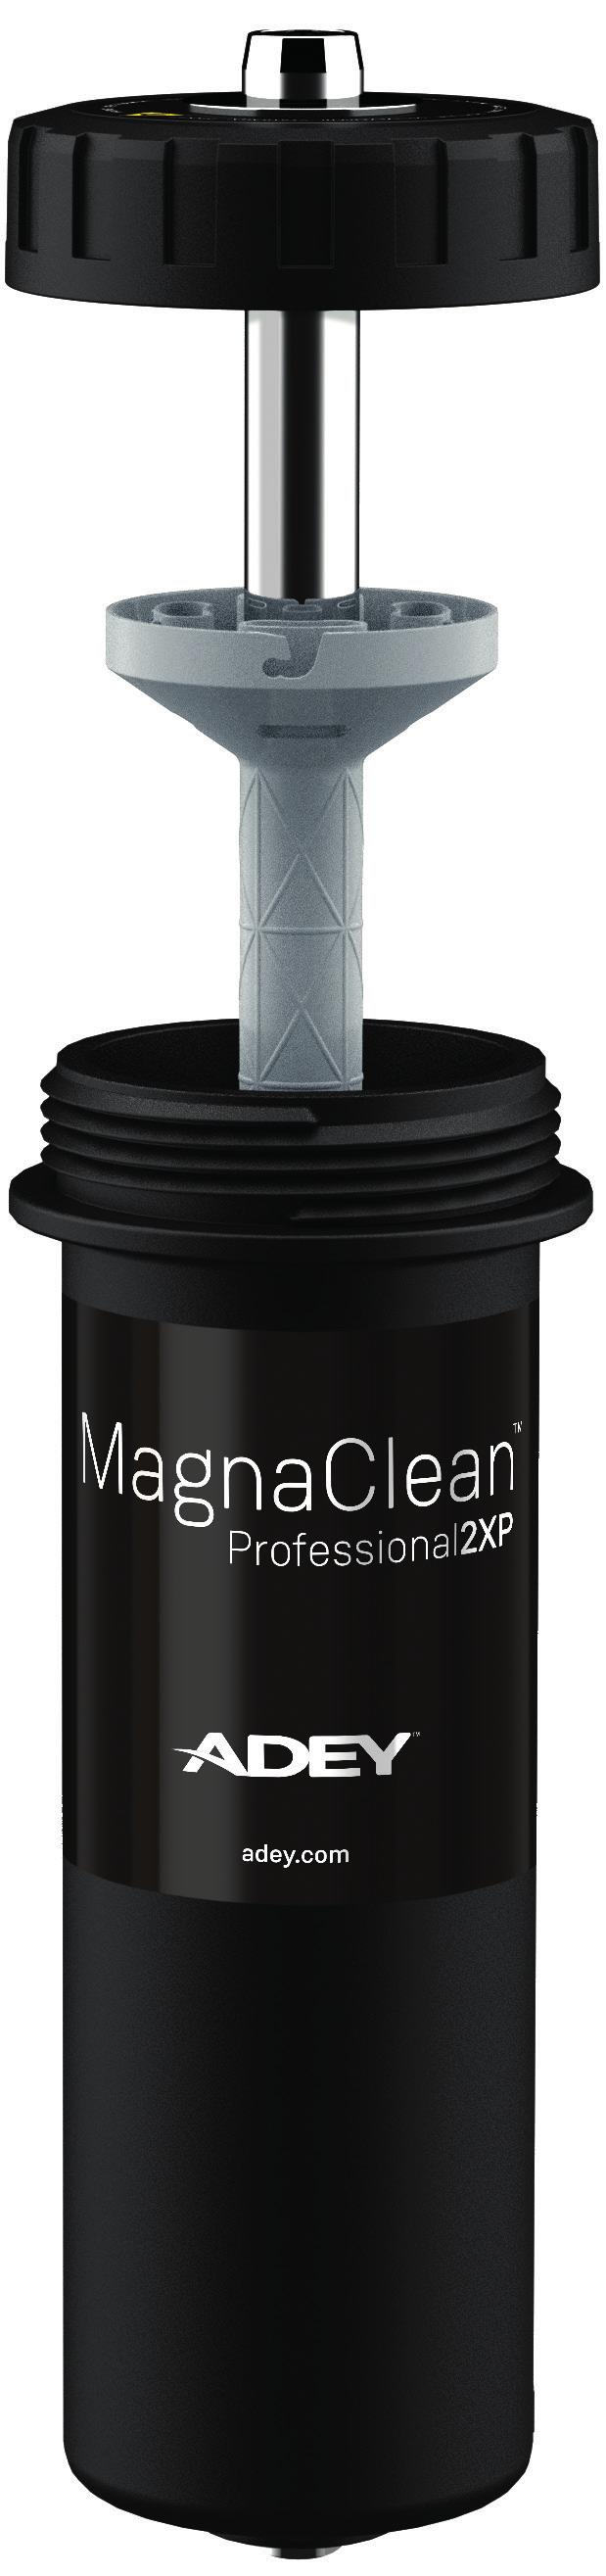 MagnaClean Professional2XP has a larger filter capacity to remove greater volumes of magnetite and is the perfect solution for larger central heating systems.